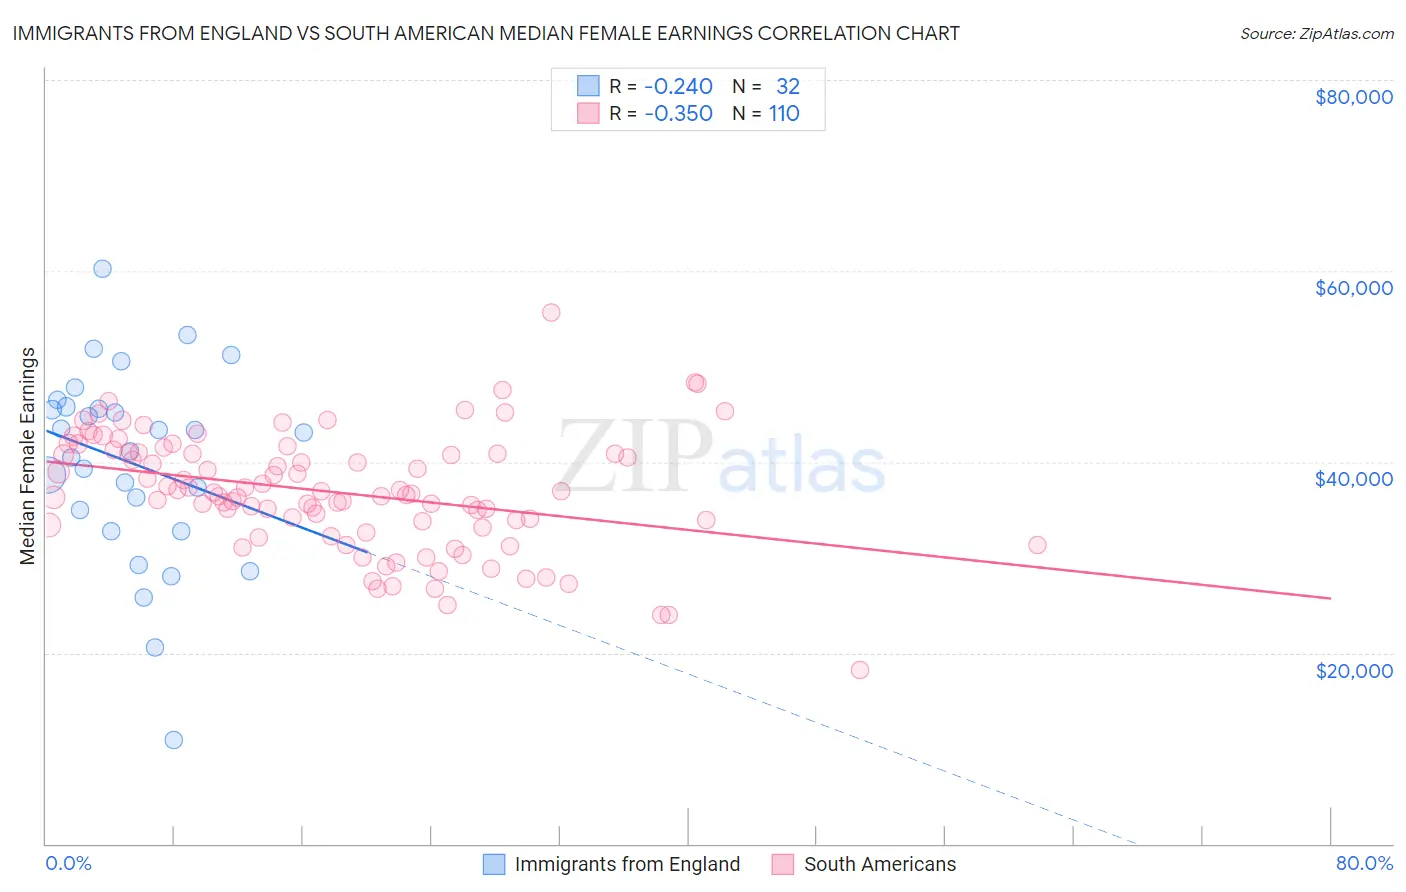 Immigrants from England vs South American Median Female Earnings